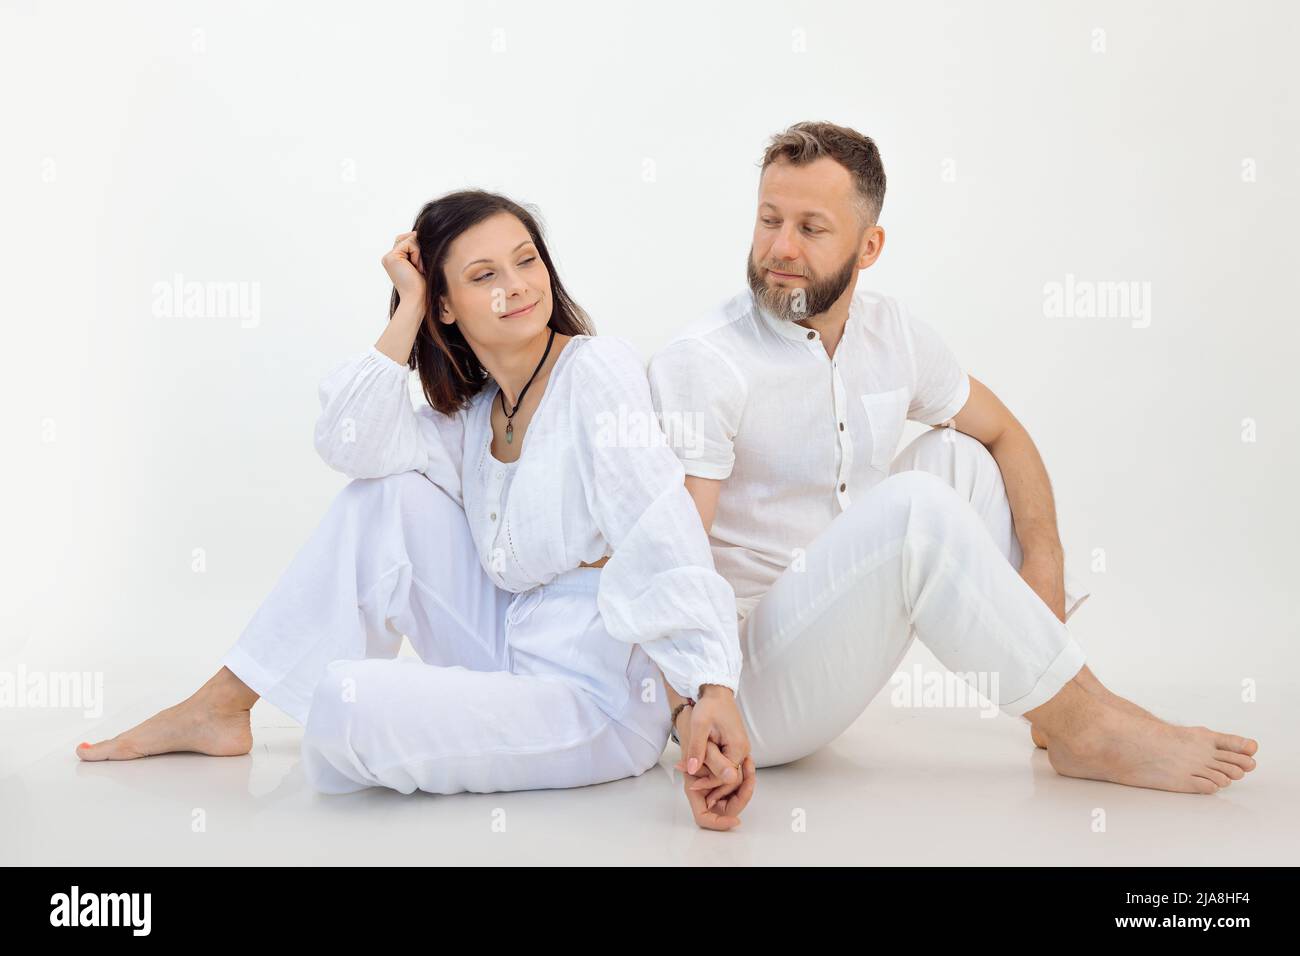 Man and woman on studio shot, couple in white outfit holding hands together. Psychology treatment for married couples Stock Photo